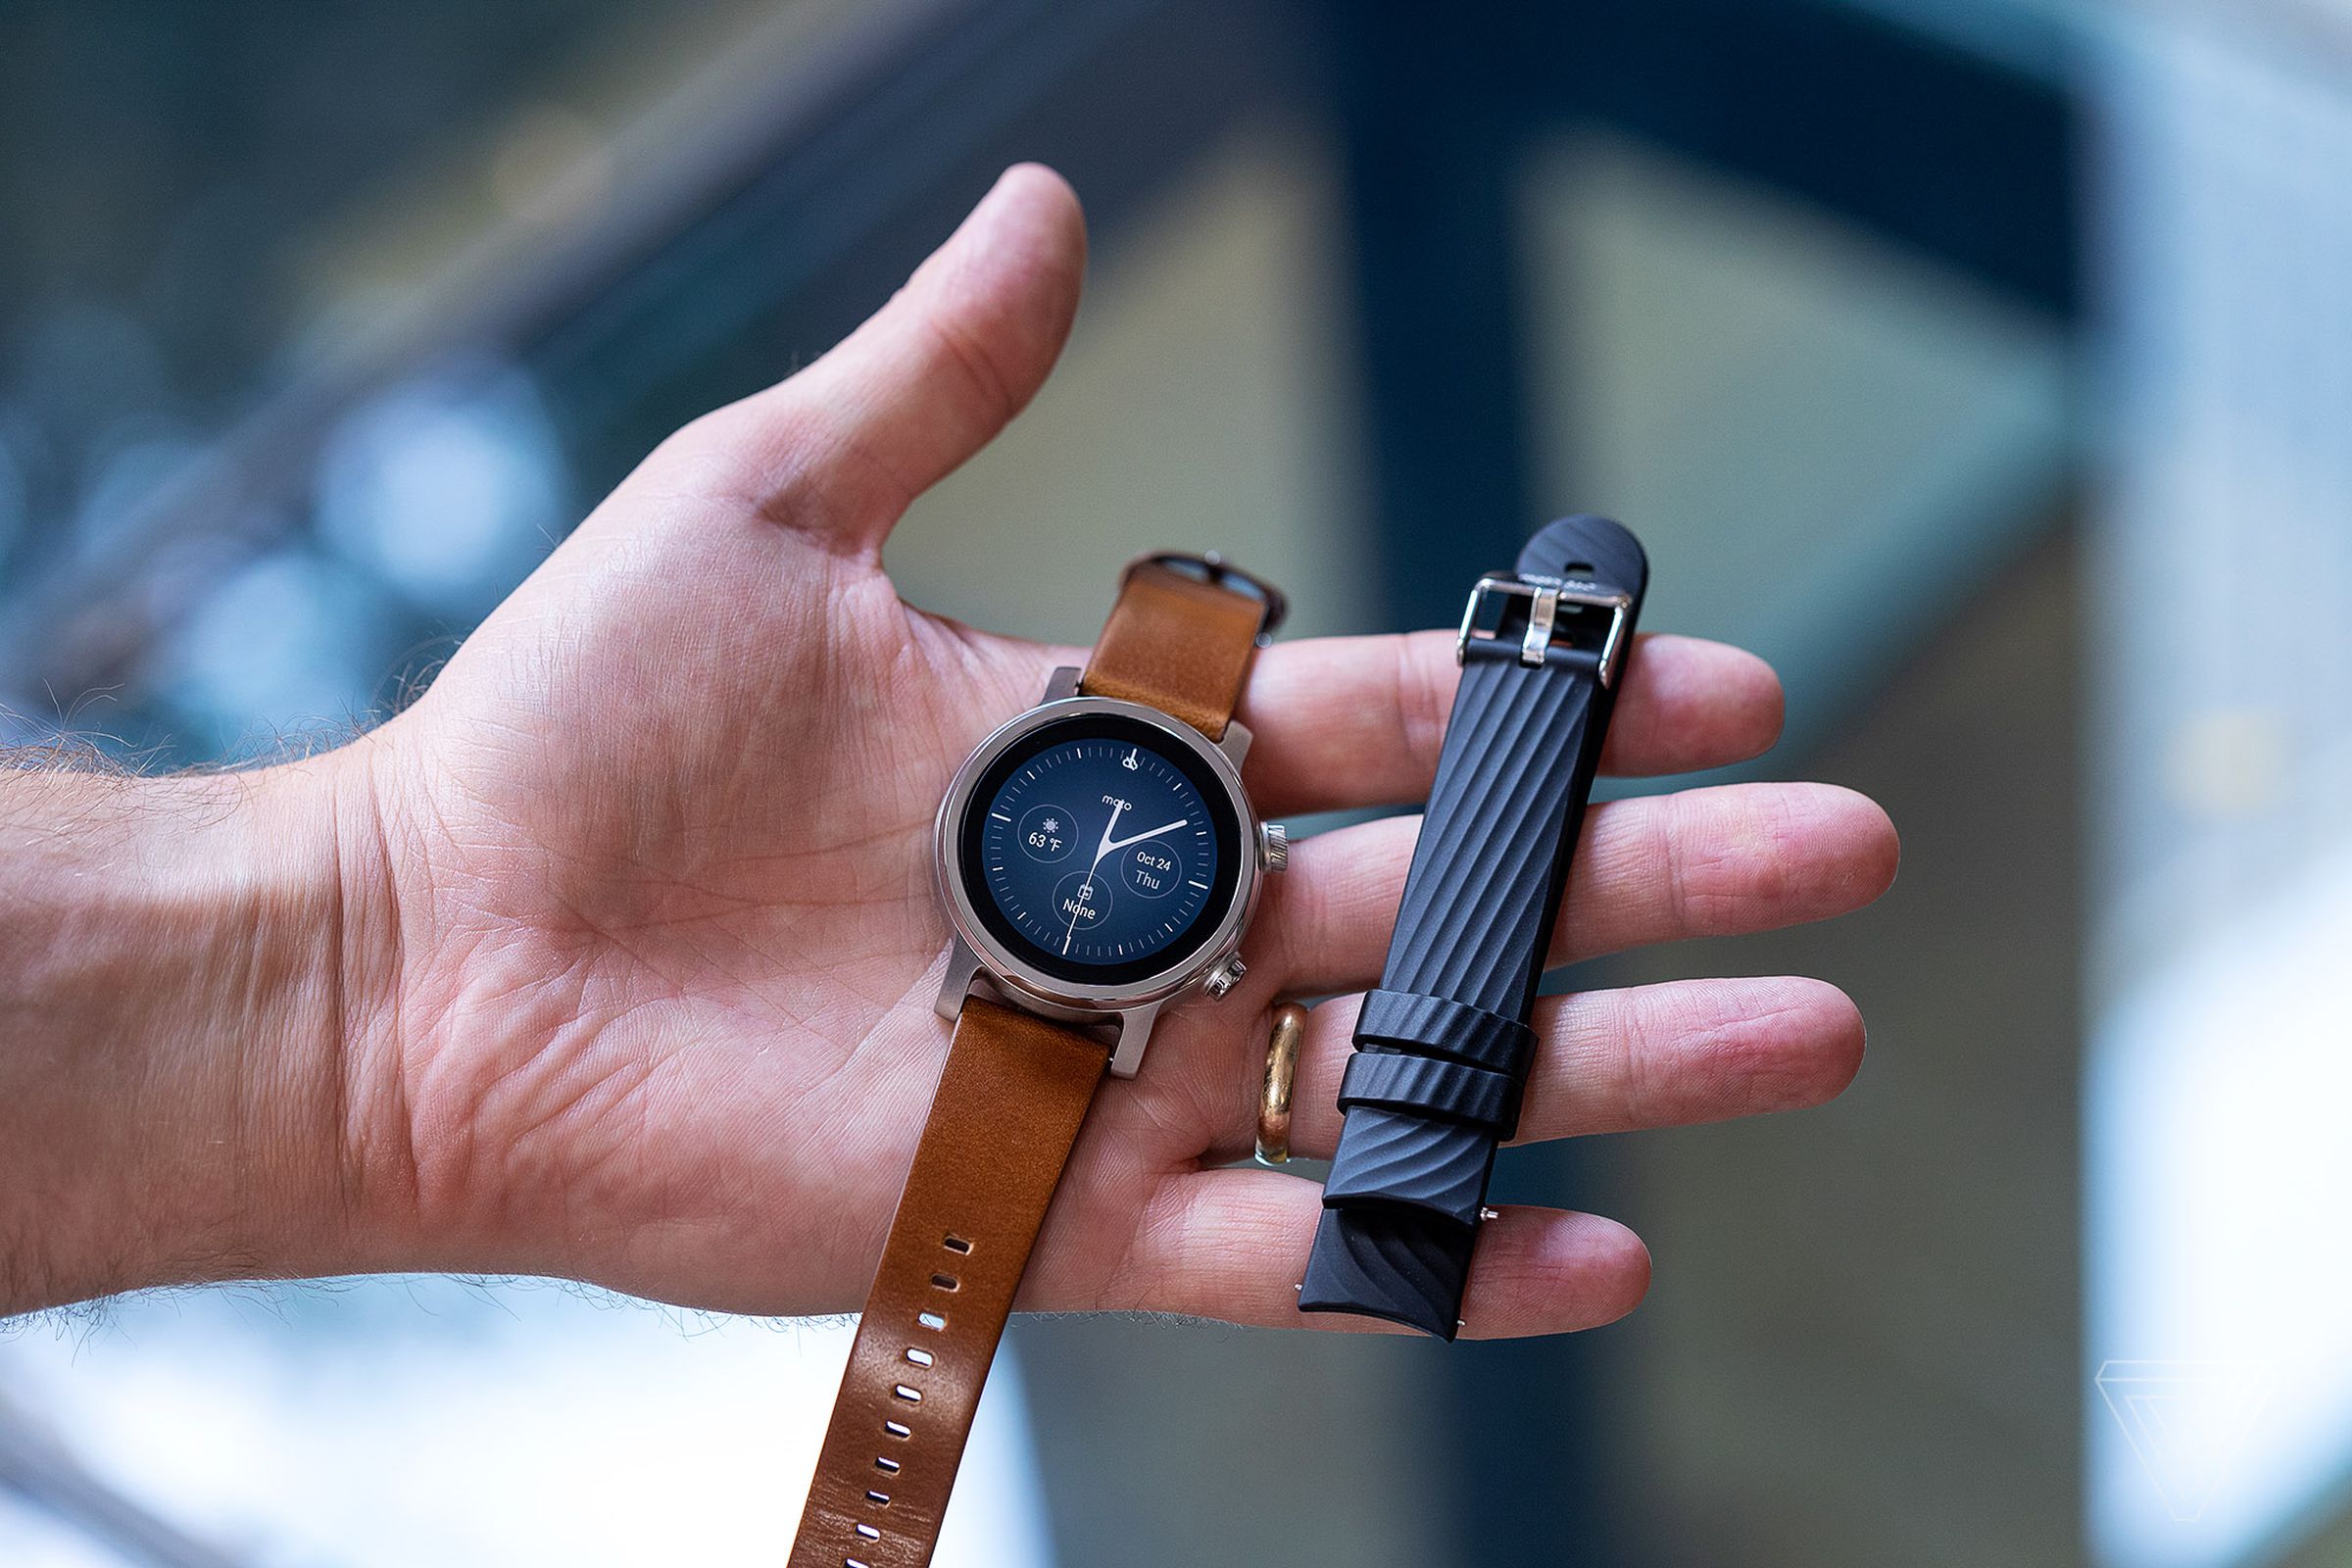 Both leather and rubber straps are included with the Moto 360